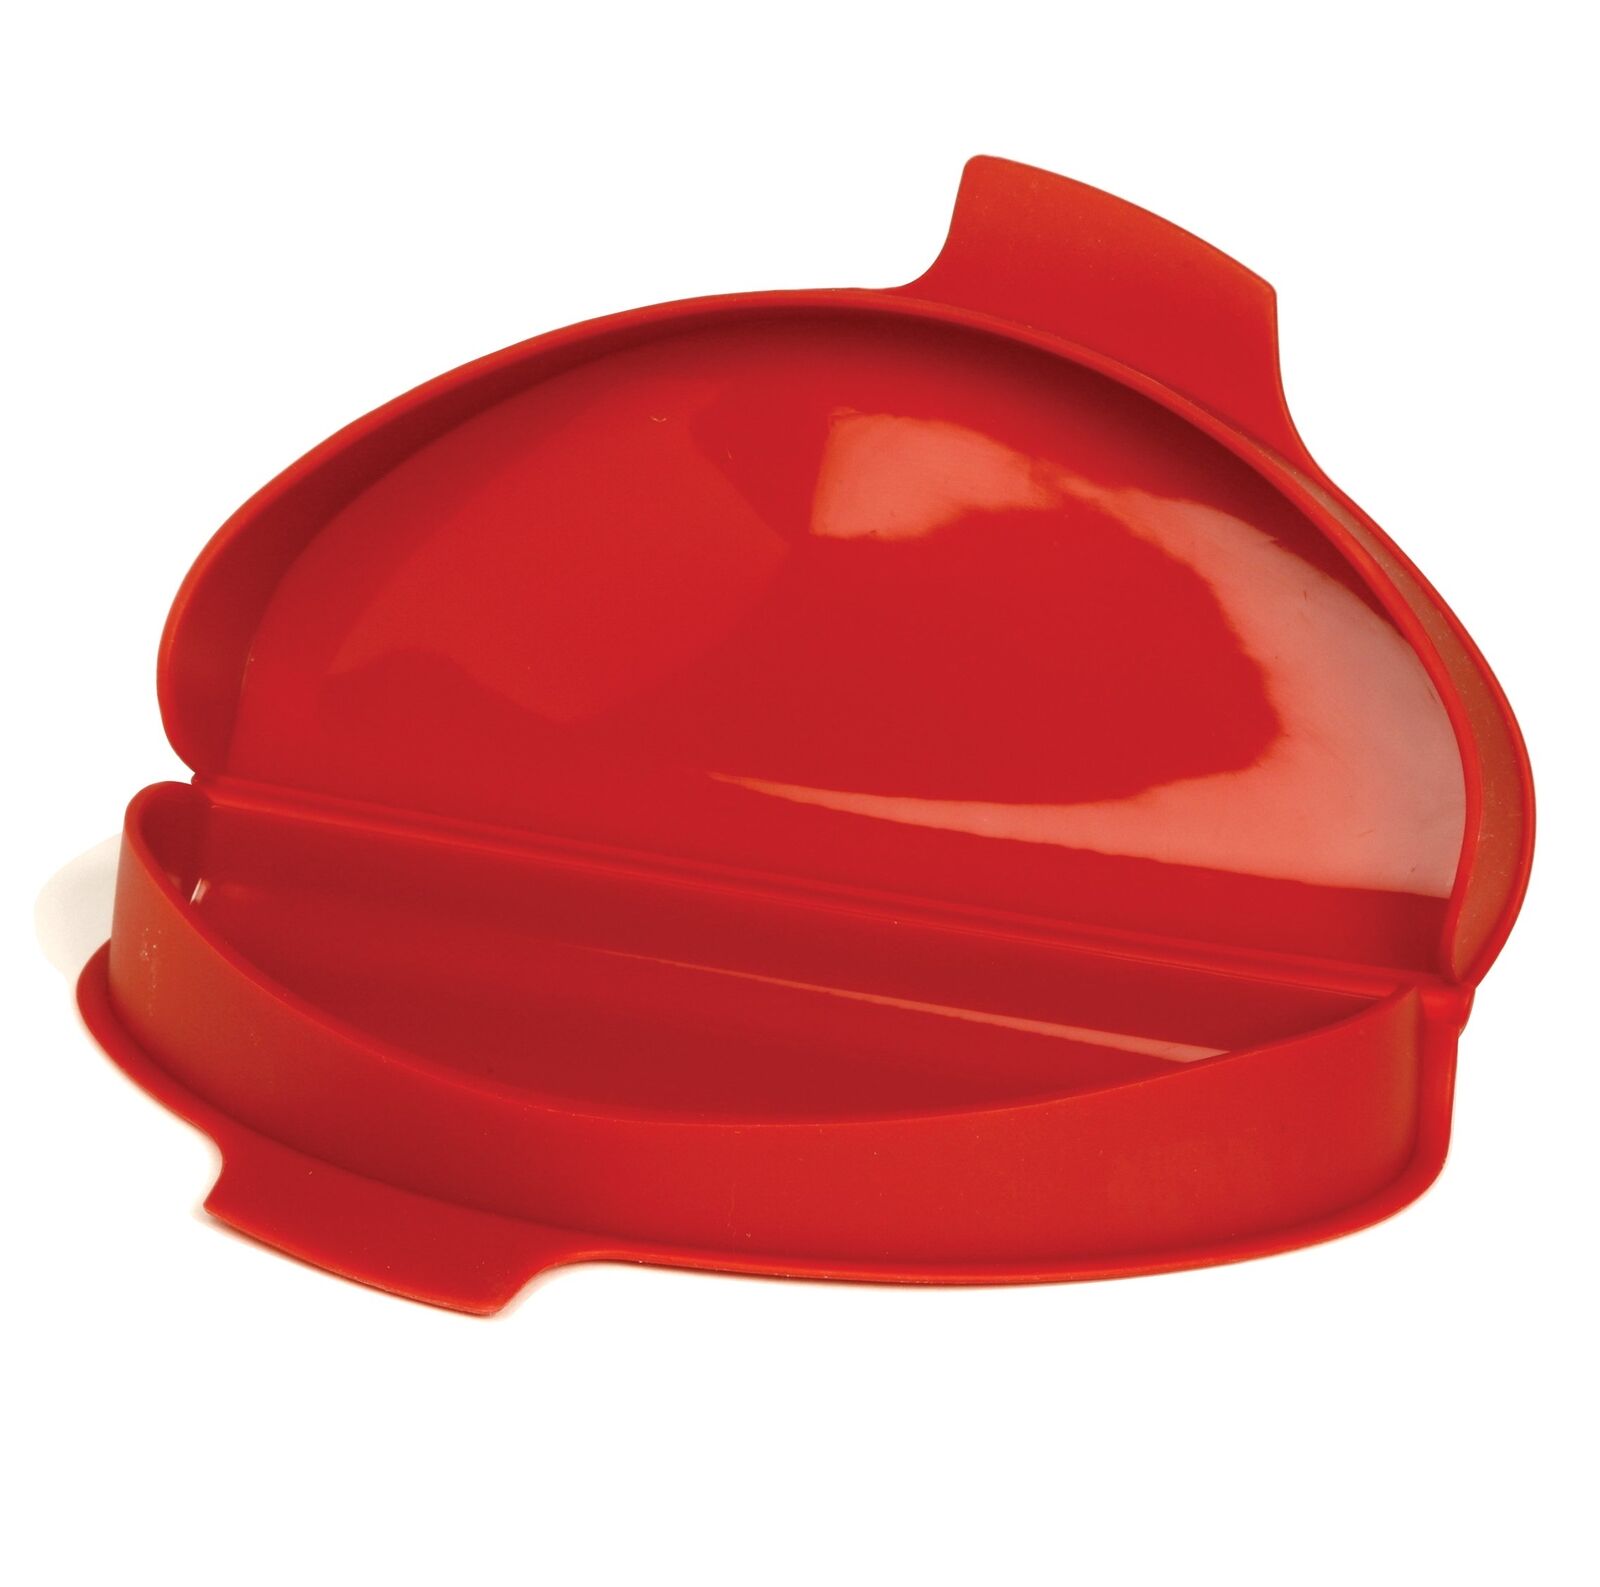 Norpro, Red Silicone Omelet Maker, 8.75 Inch x 4.75 x 1.38 Inch, 